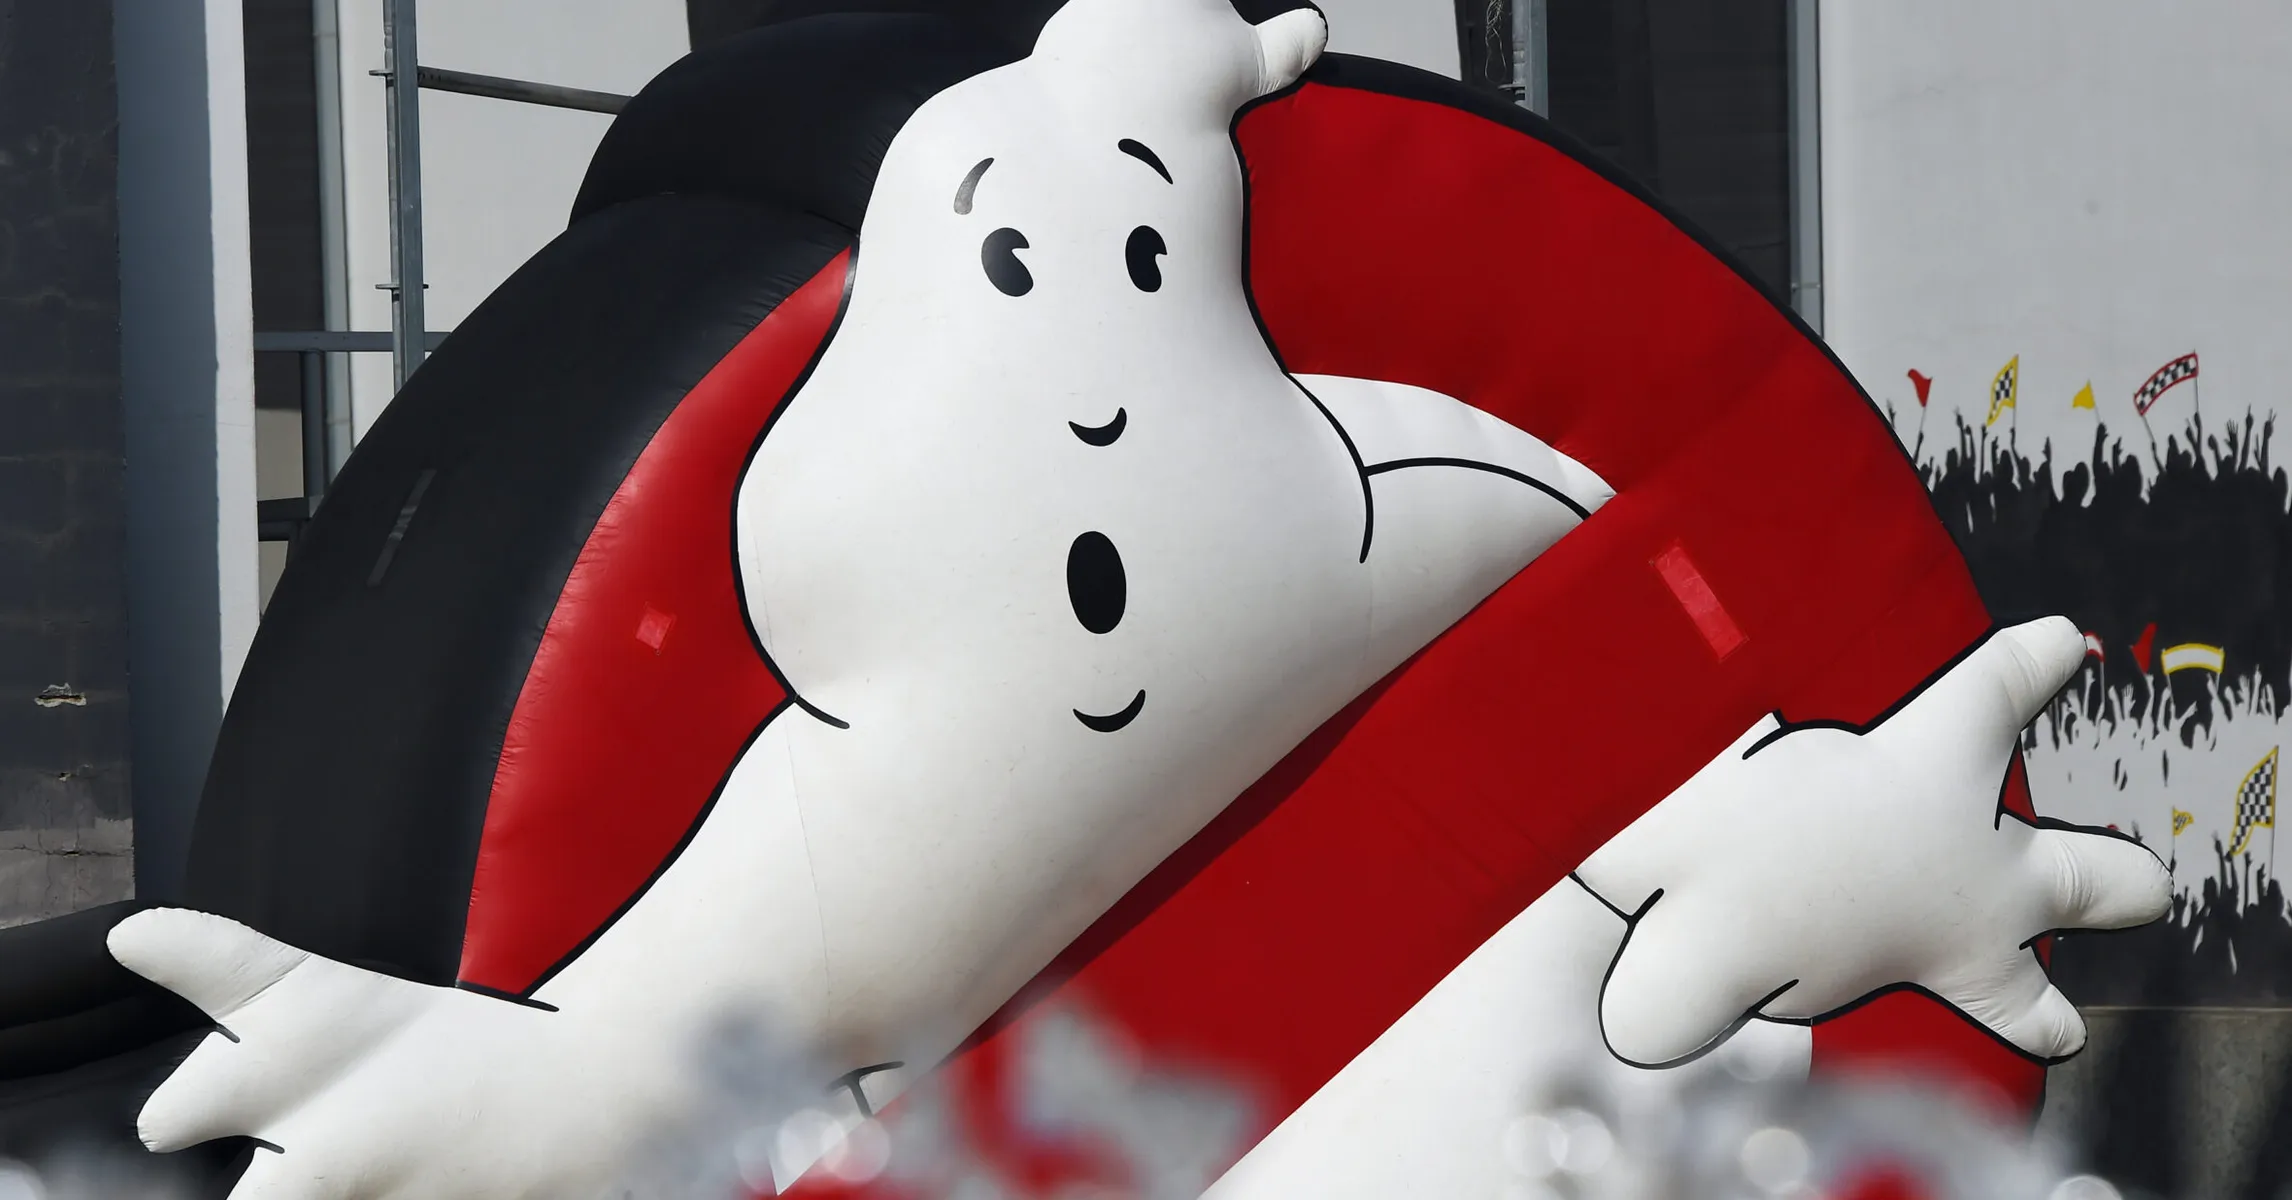 “Ghostbusters” Franchise: All 5 Films, Ranked Worst To Best